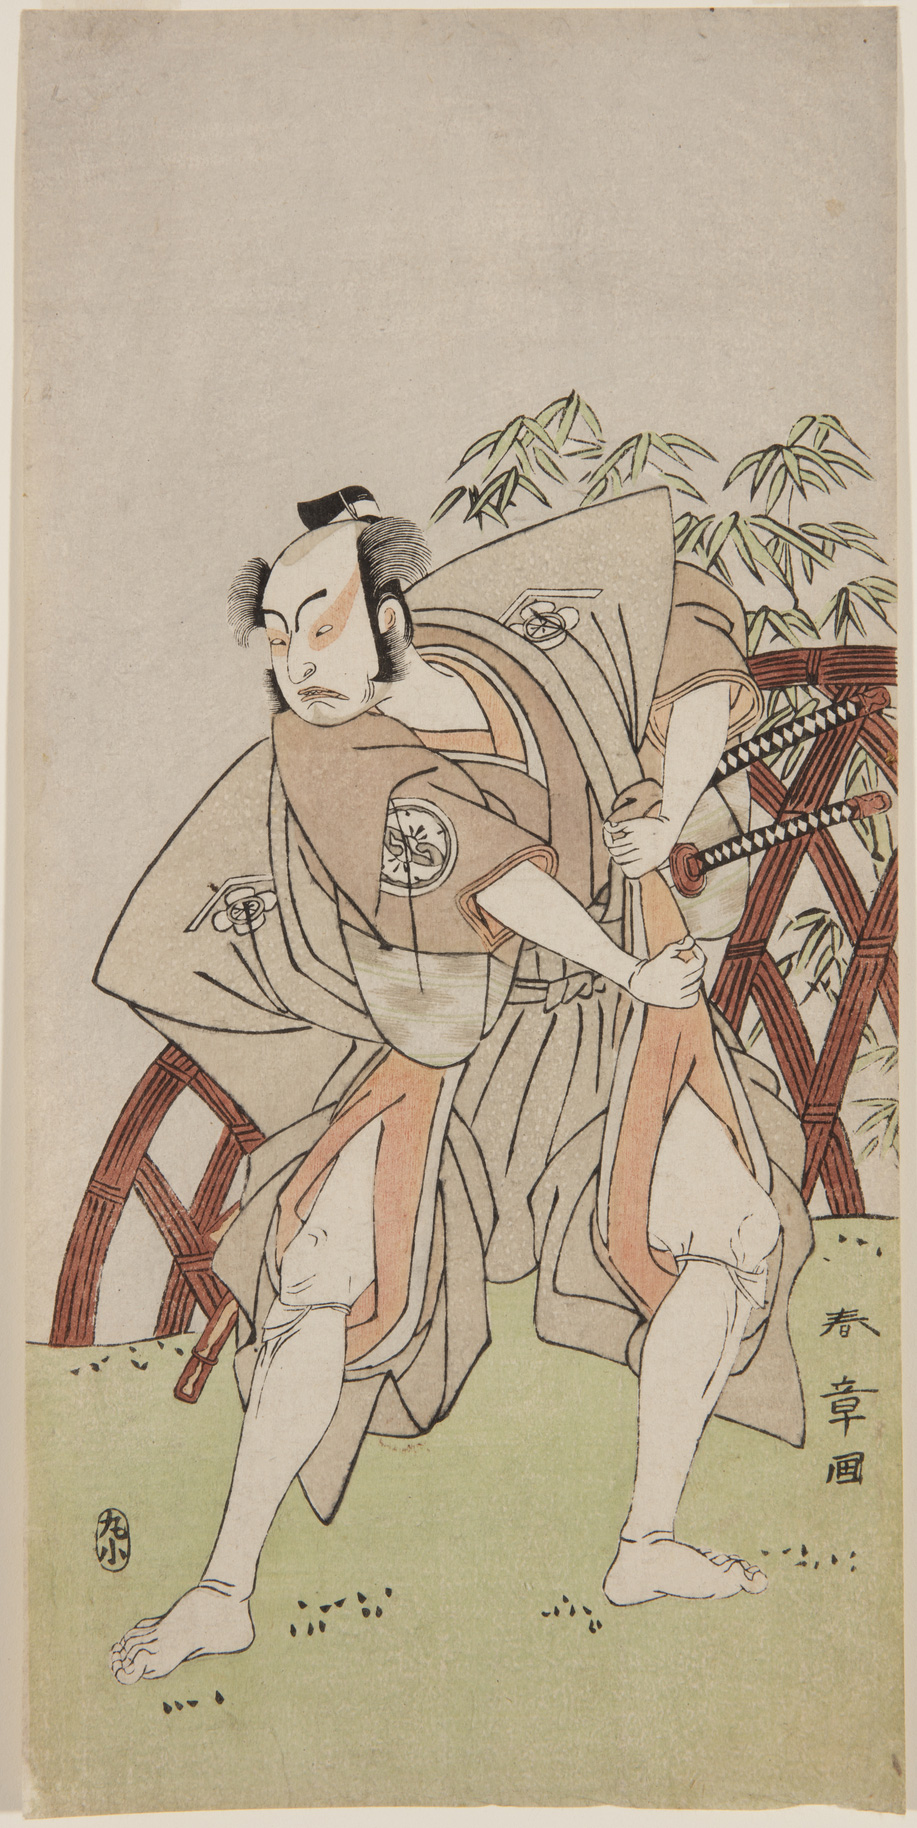 A Japanese print of an actor stood in a dramatic pose in samurai costume.